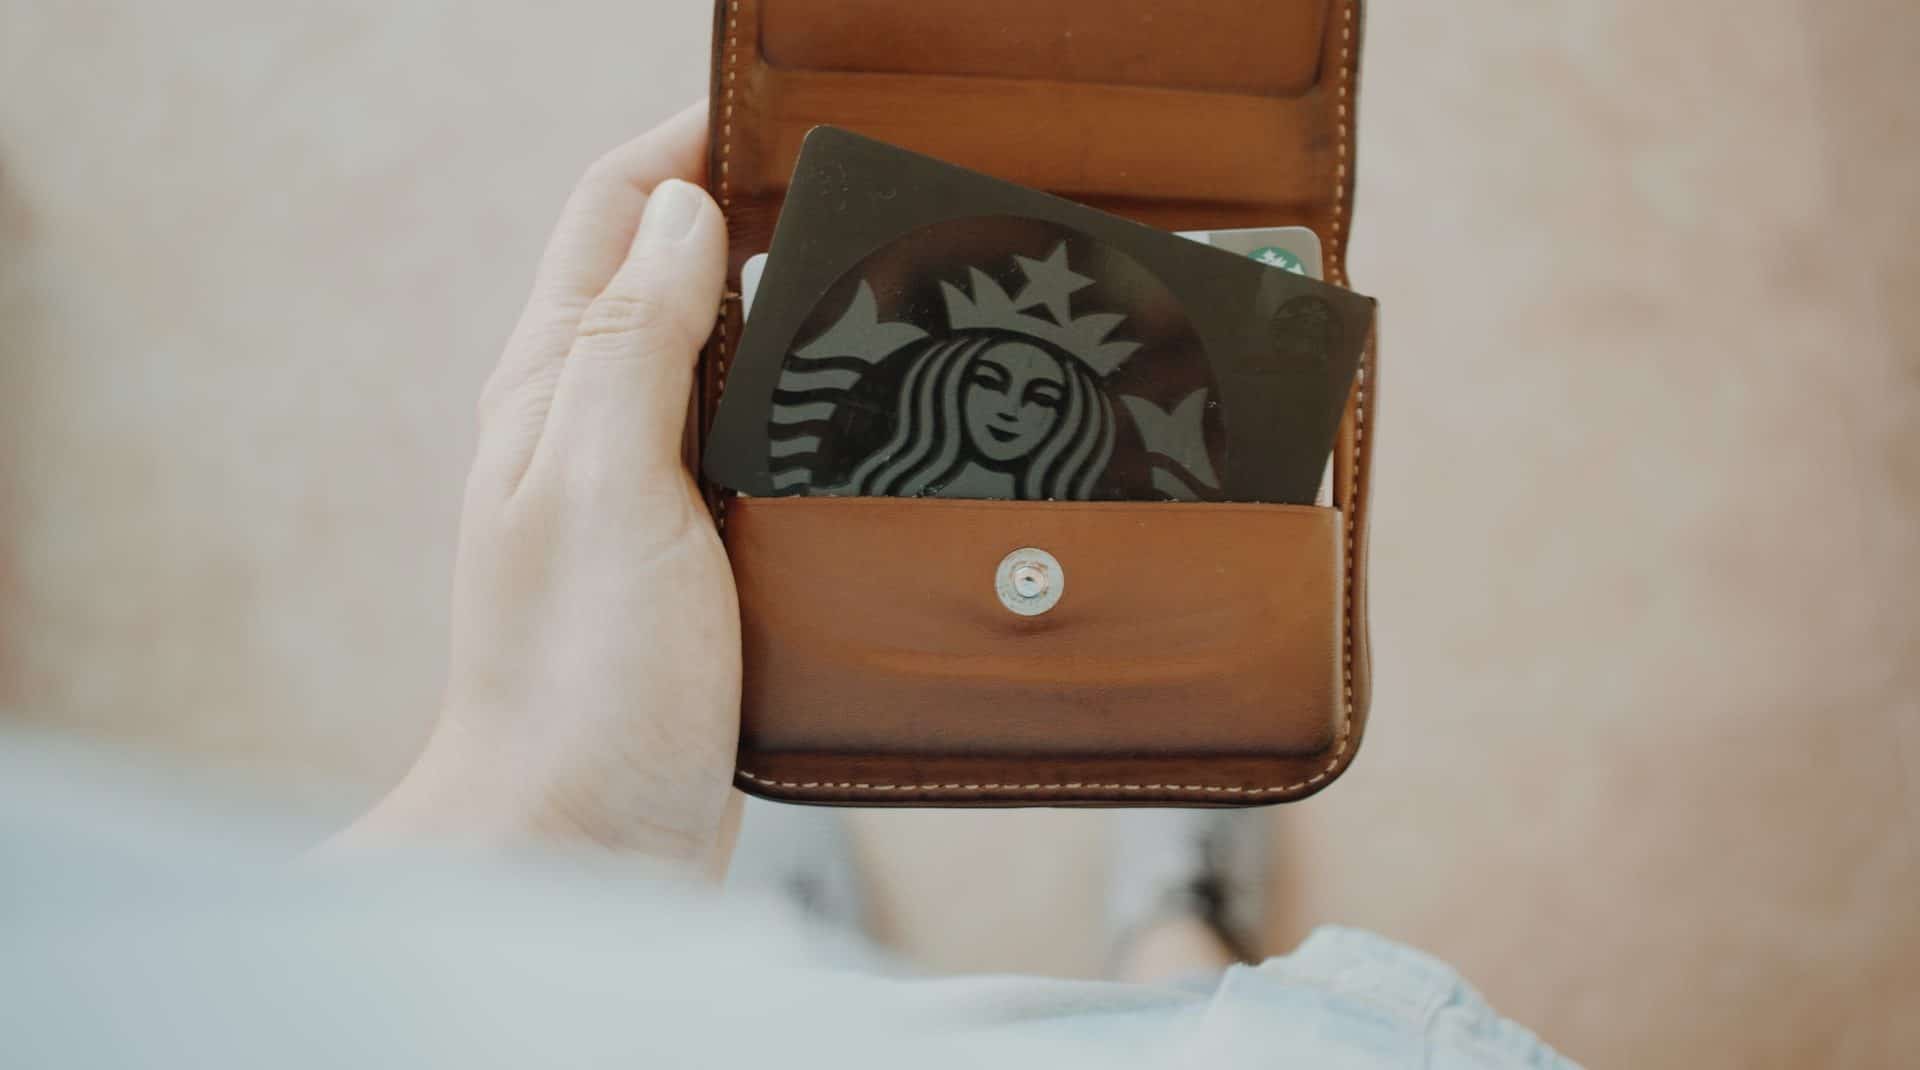 With Starbuck's new multi-tender loyalty program, consumers won't need to carry a Starbucks card in their wallet.